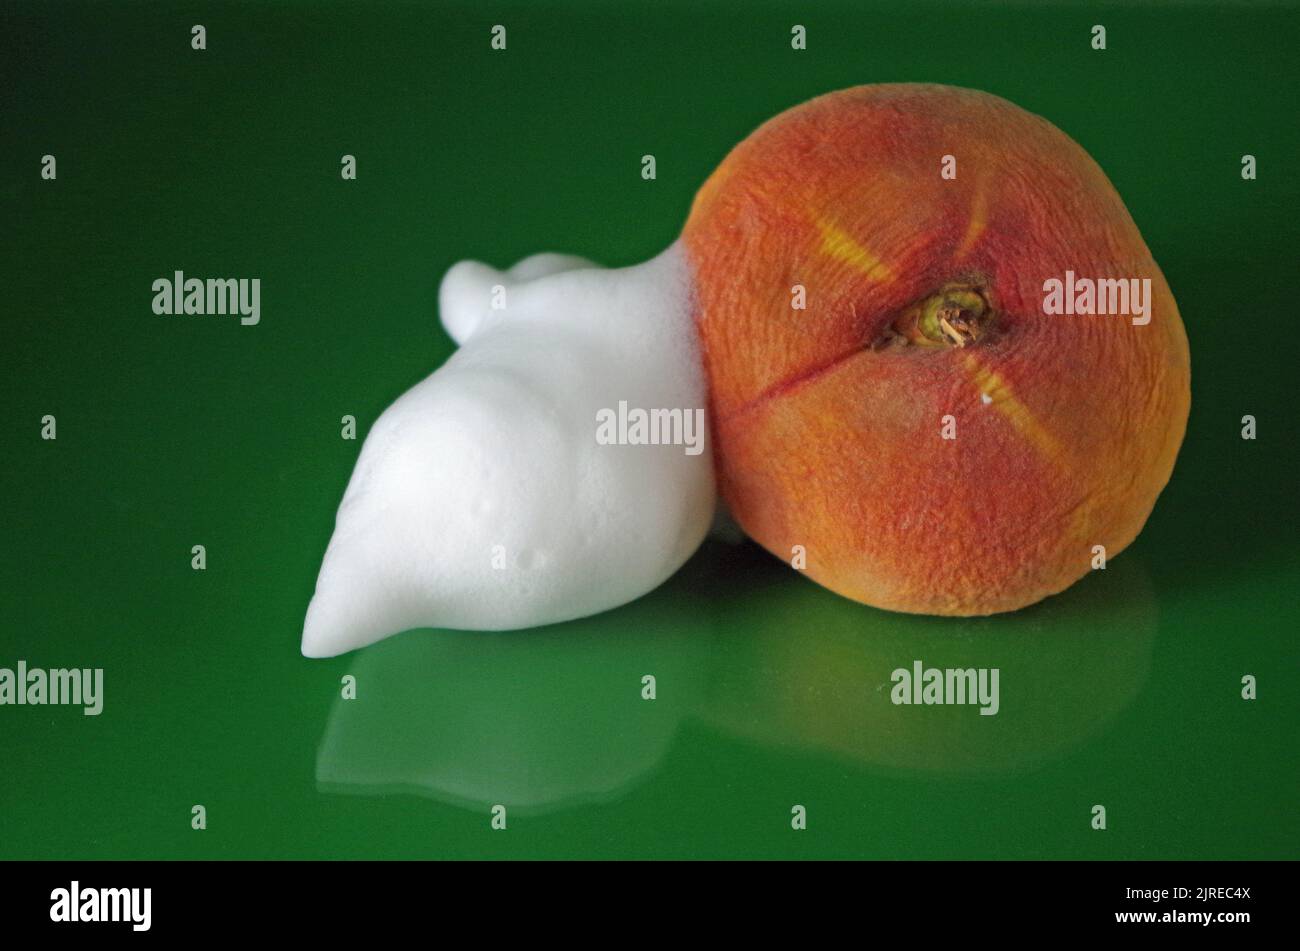 A Peach with Foam. Like to change dry skin to wet. Stock Photo